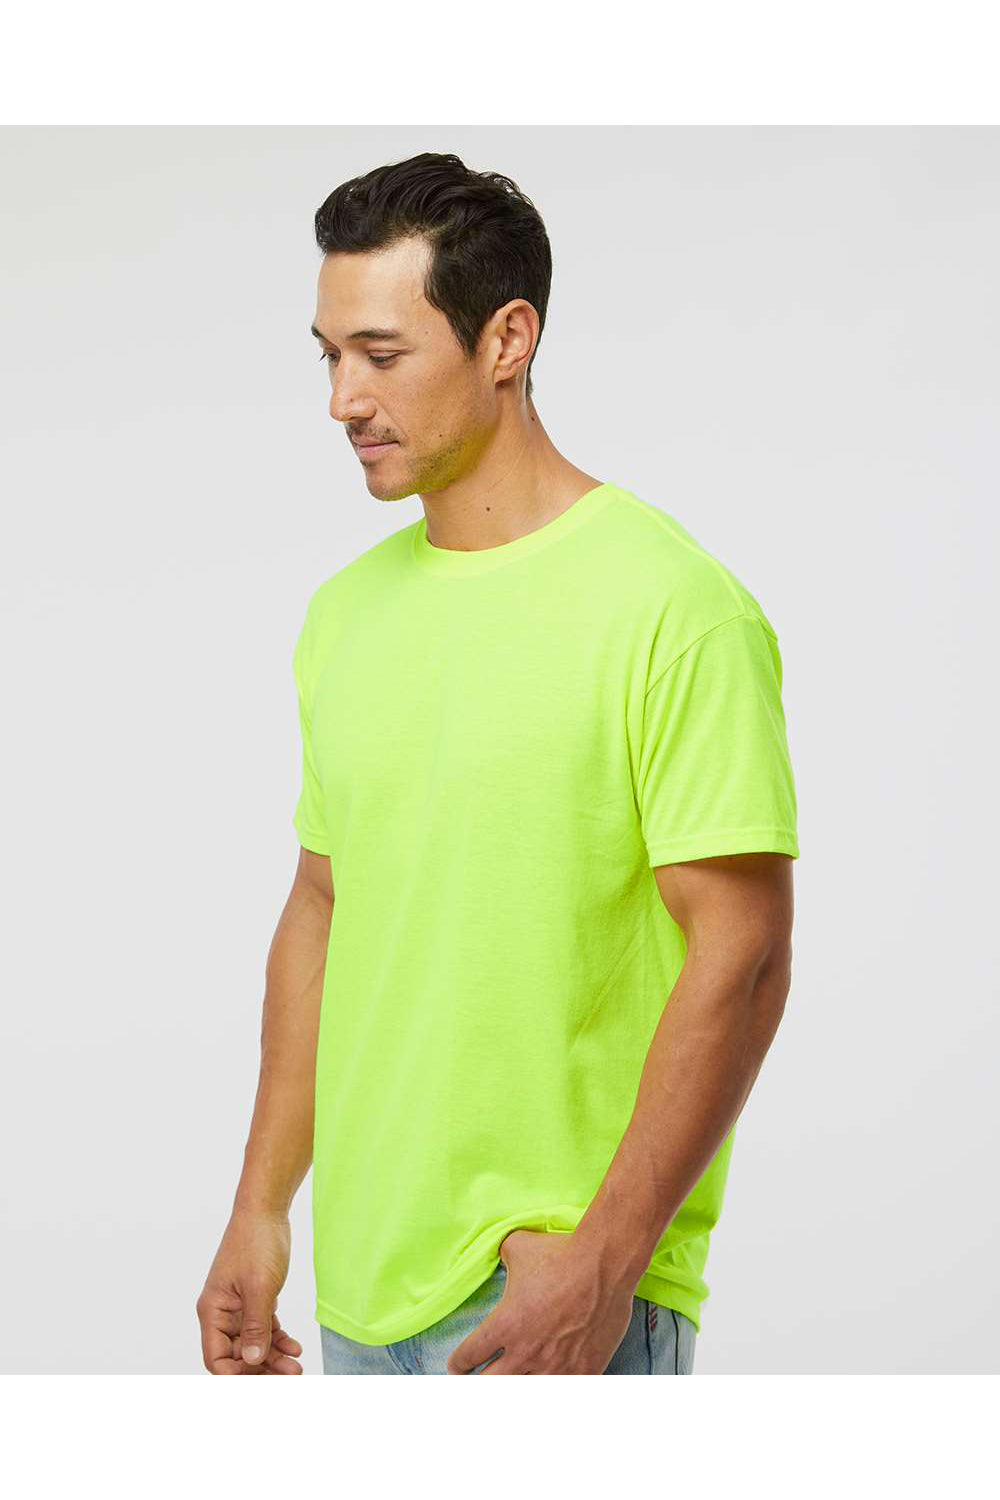 M&O 4800 Mens Gold Soft Touch Short Sleeve Crewneck T-Shirt Safety Green Model Side